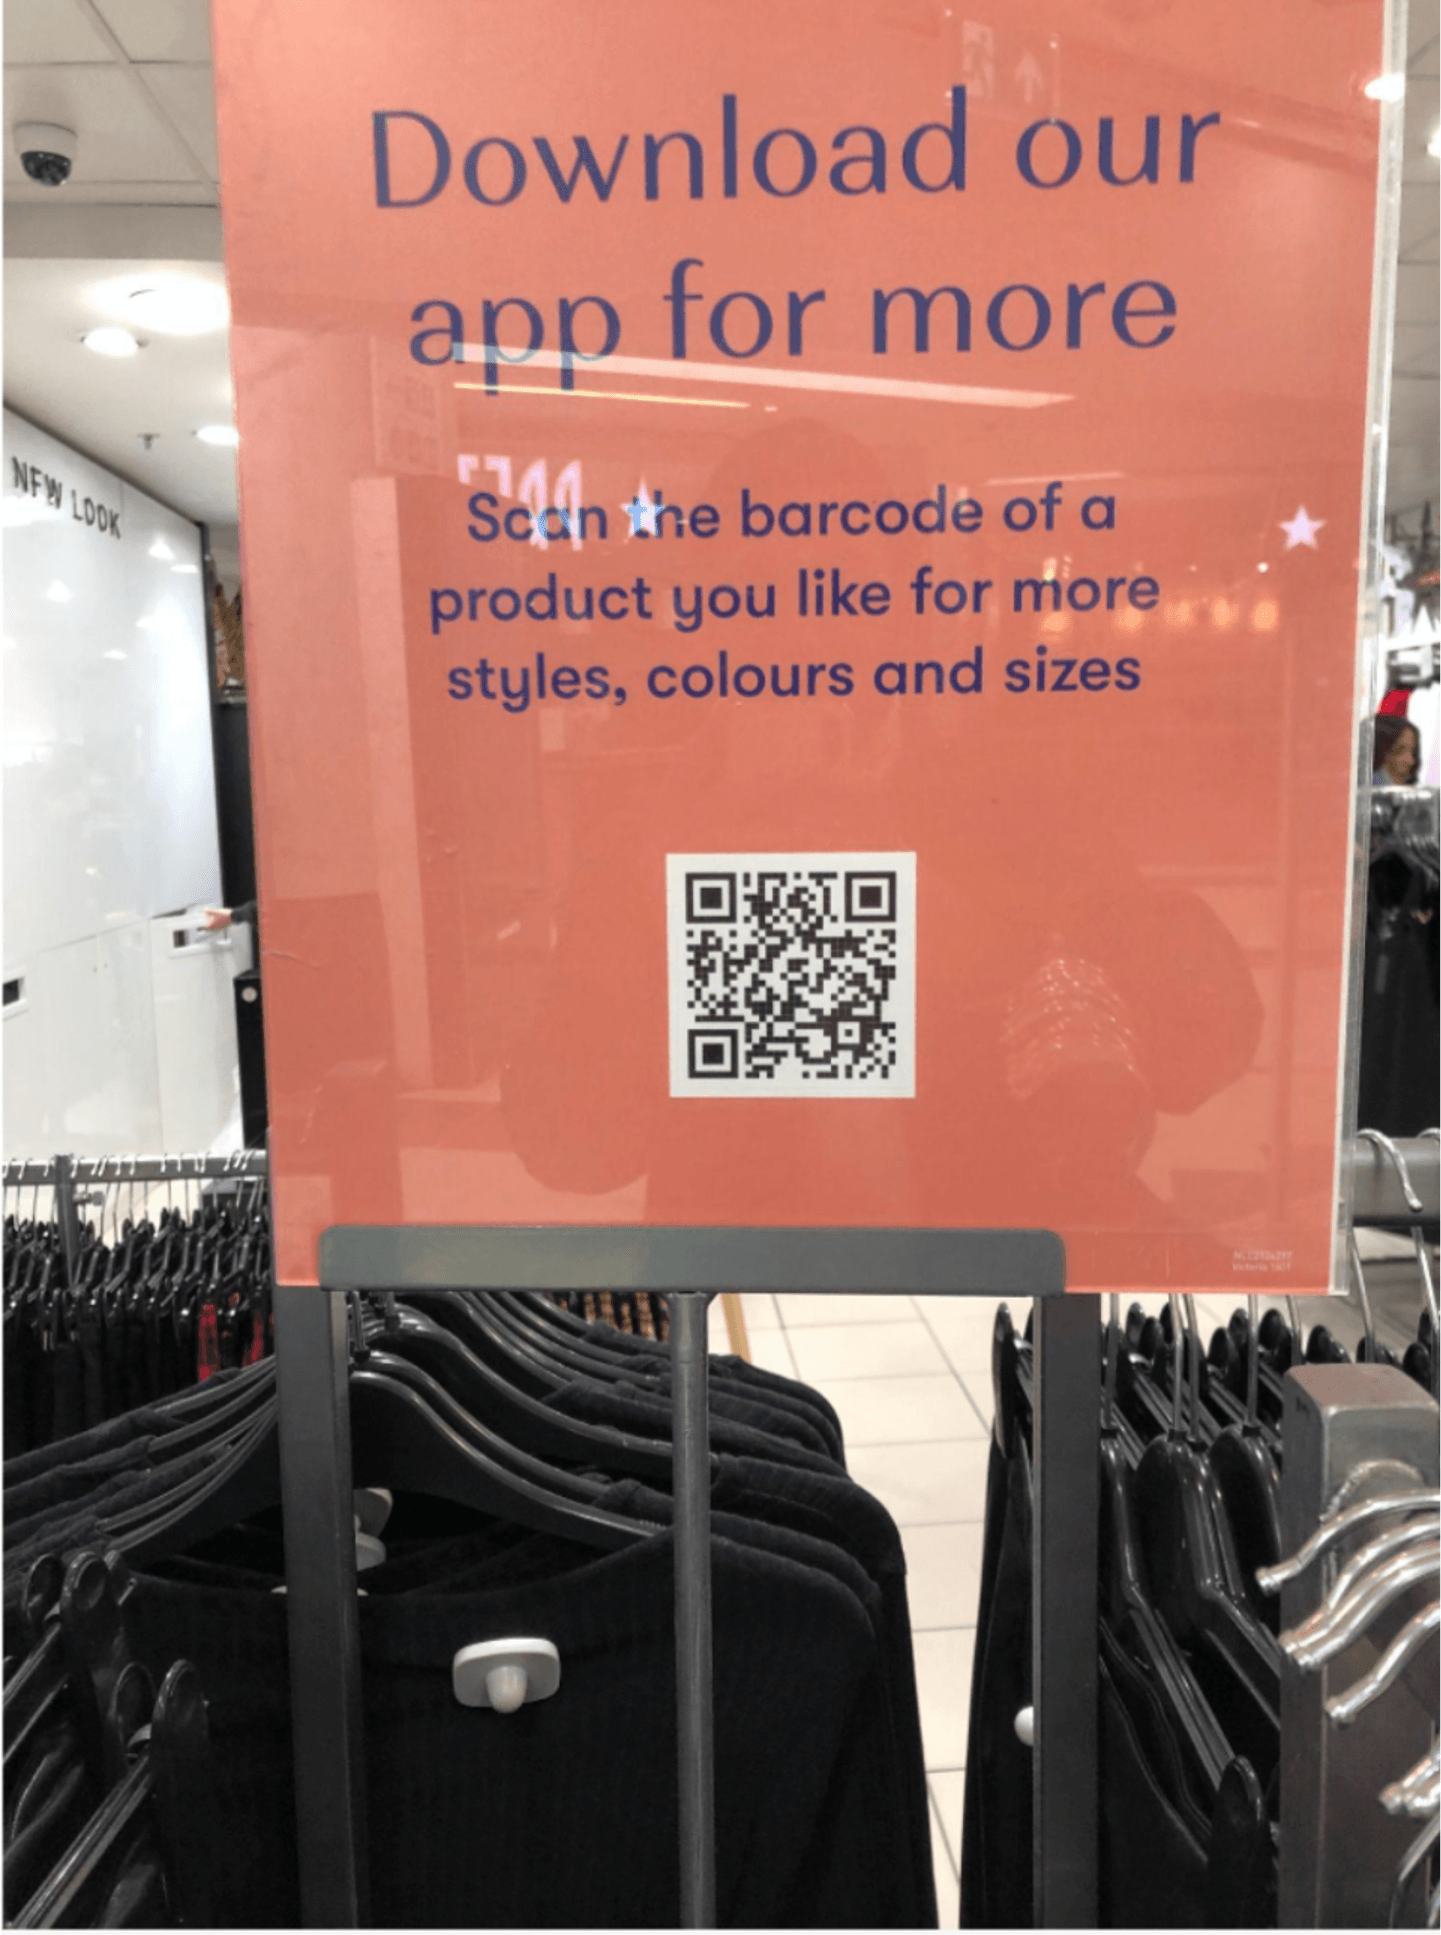 Picture of an in-store sign: "Download our app for more." The sign shows a scannable QR code to take shoppers to the app. 